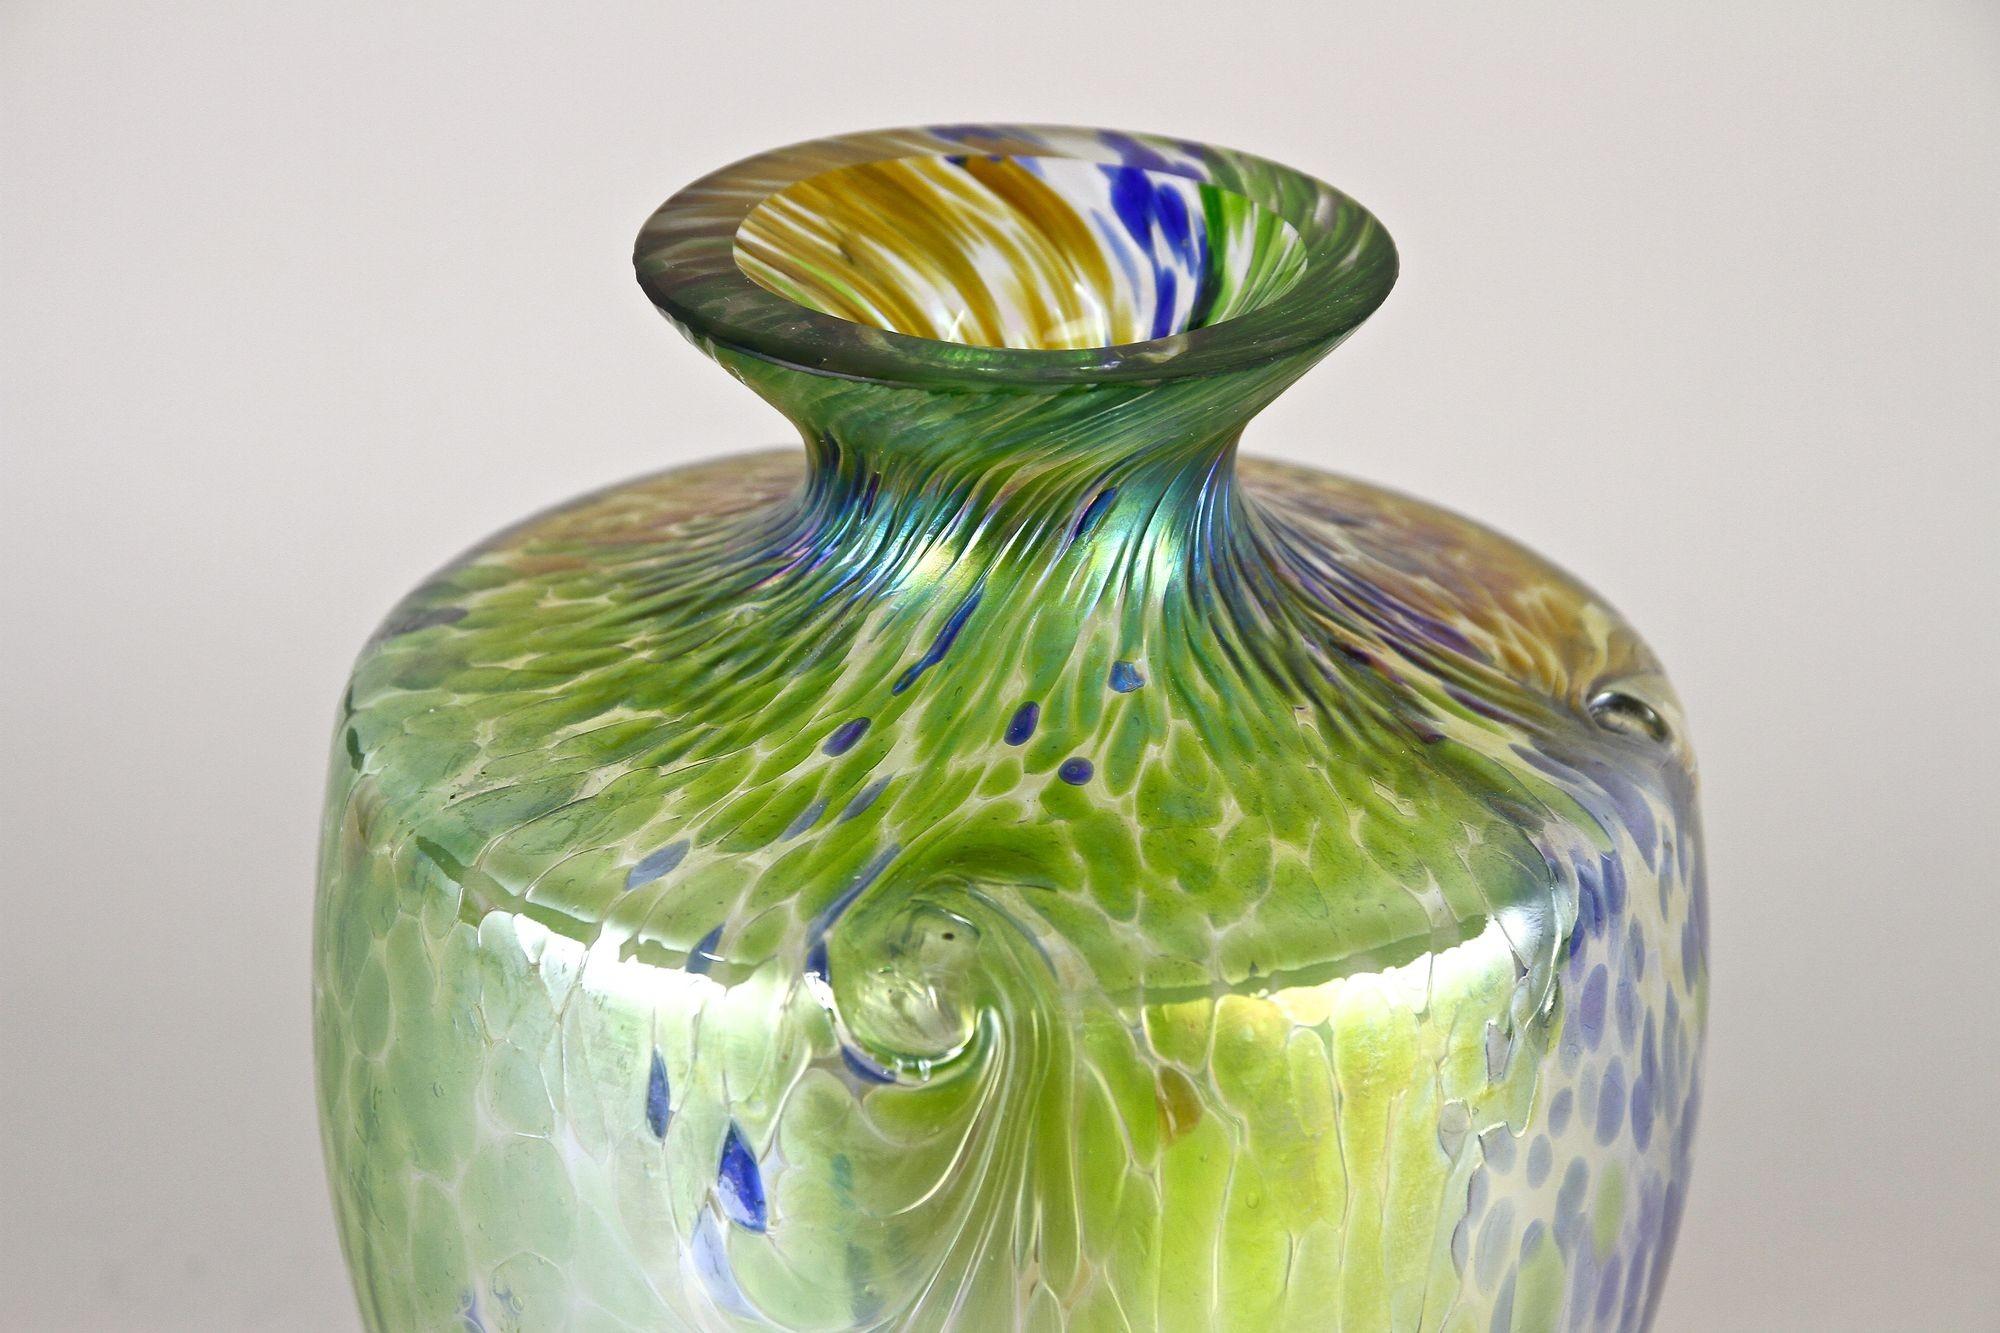 Iridescent Art Nouveau Glass Vase Attributed To Fritz Heckert, Bohemia ca. 1905 For Sale 1